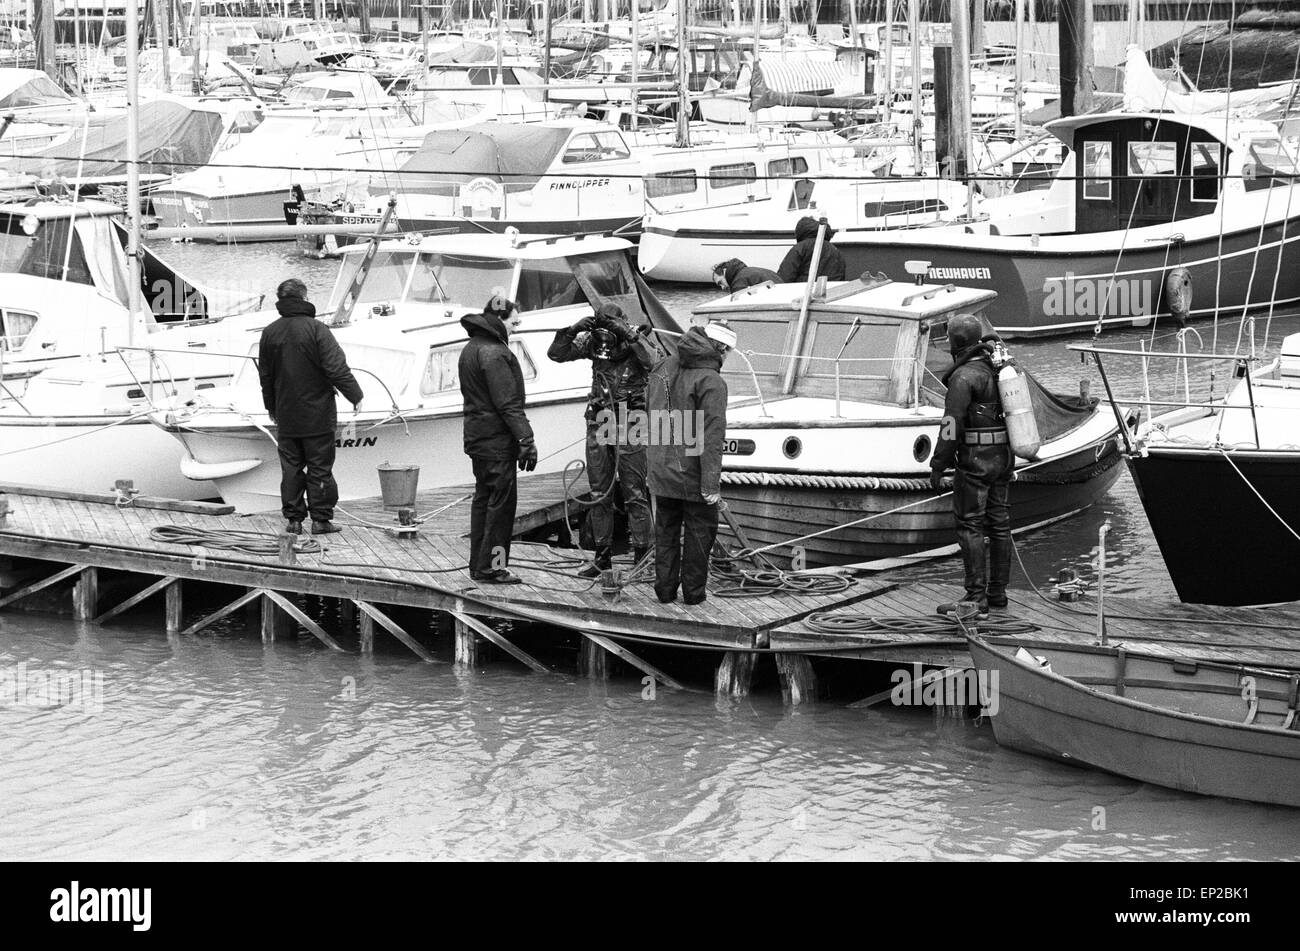 Police Manhunt in Newhaven Sussex 27th November 1974. Police divers at work at Cresta marina for missing Lord Lucan now wanted on murder charge.Richard John Bingham 7th Earl of Lucan popularly known as Lord Lucan was British peer who disappeared in the early hours of 8 November 1974 following the murder of Sandra Rivett his children's nanny the previous evening. There has been no verified sighting of him since then. On 19th June 1975 an inquest jury named Lucan as the murderer of Sandra Rivett.He was presumed deceased in chambers on 11th December 1992 and declared legally dead in October 1999. Stock Photo